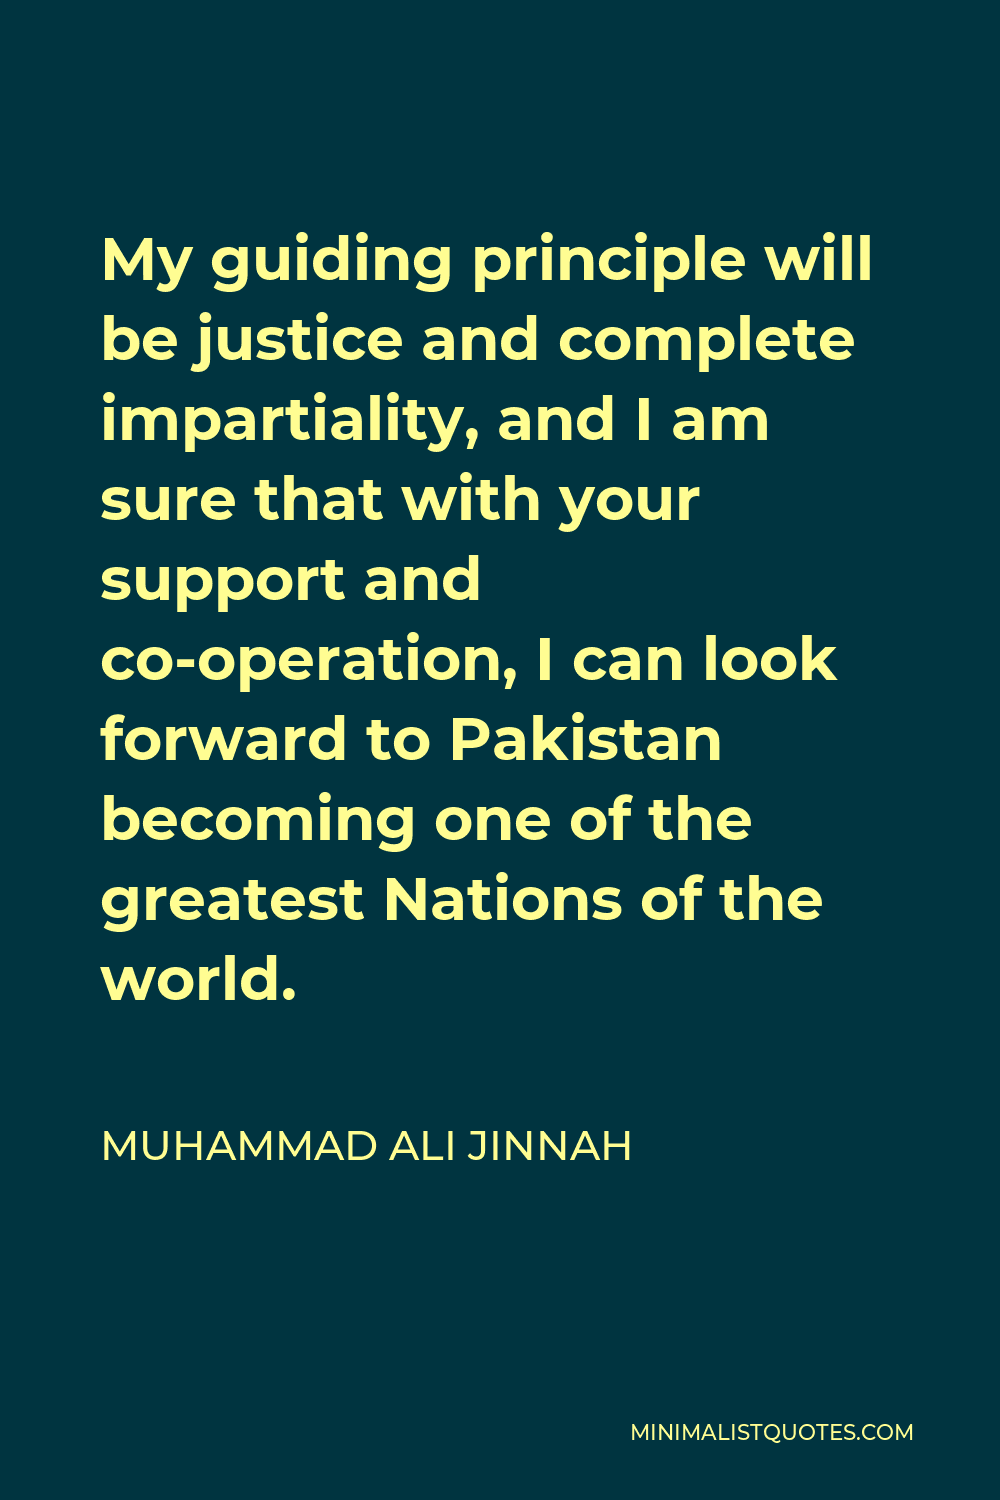 Muhammad Ali Jinnah Quote - My guiding principle will be justice and complete impartiality, and I am sure that with your support and co-operation, I can look forward to Pakistan becoming one of the greatest Nations of the world.